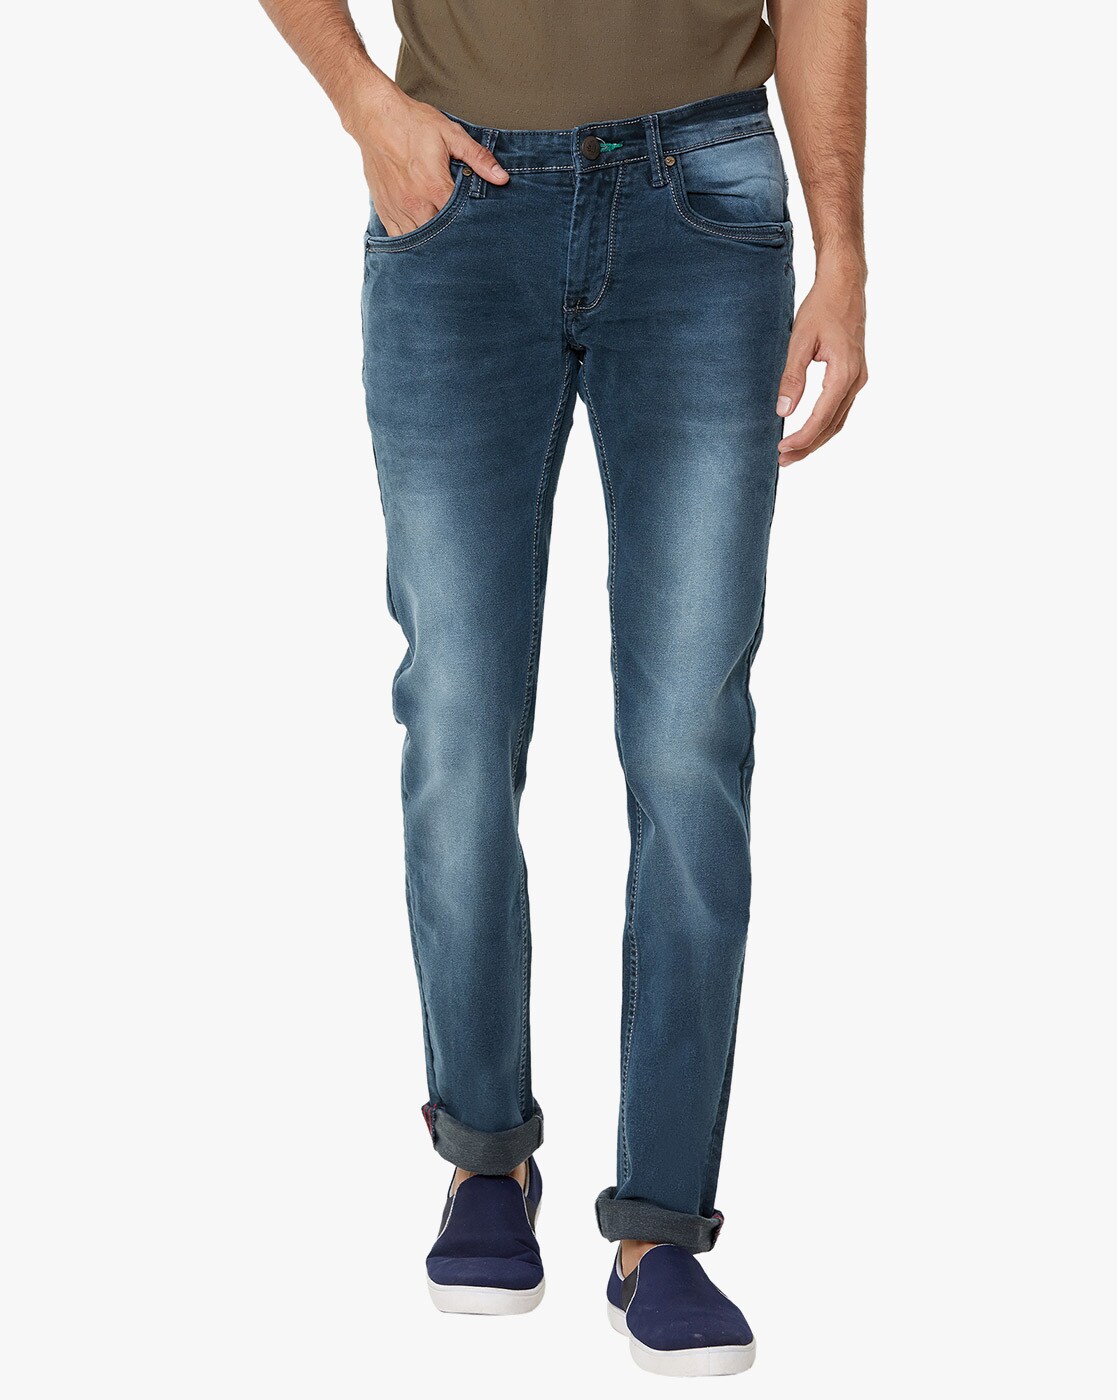 Warrior Jeans Men Denim Jeans Pant in India at best Wholesale prices